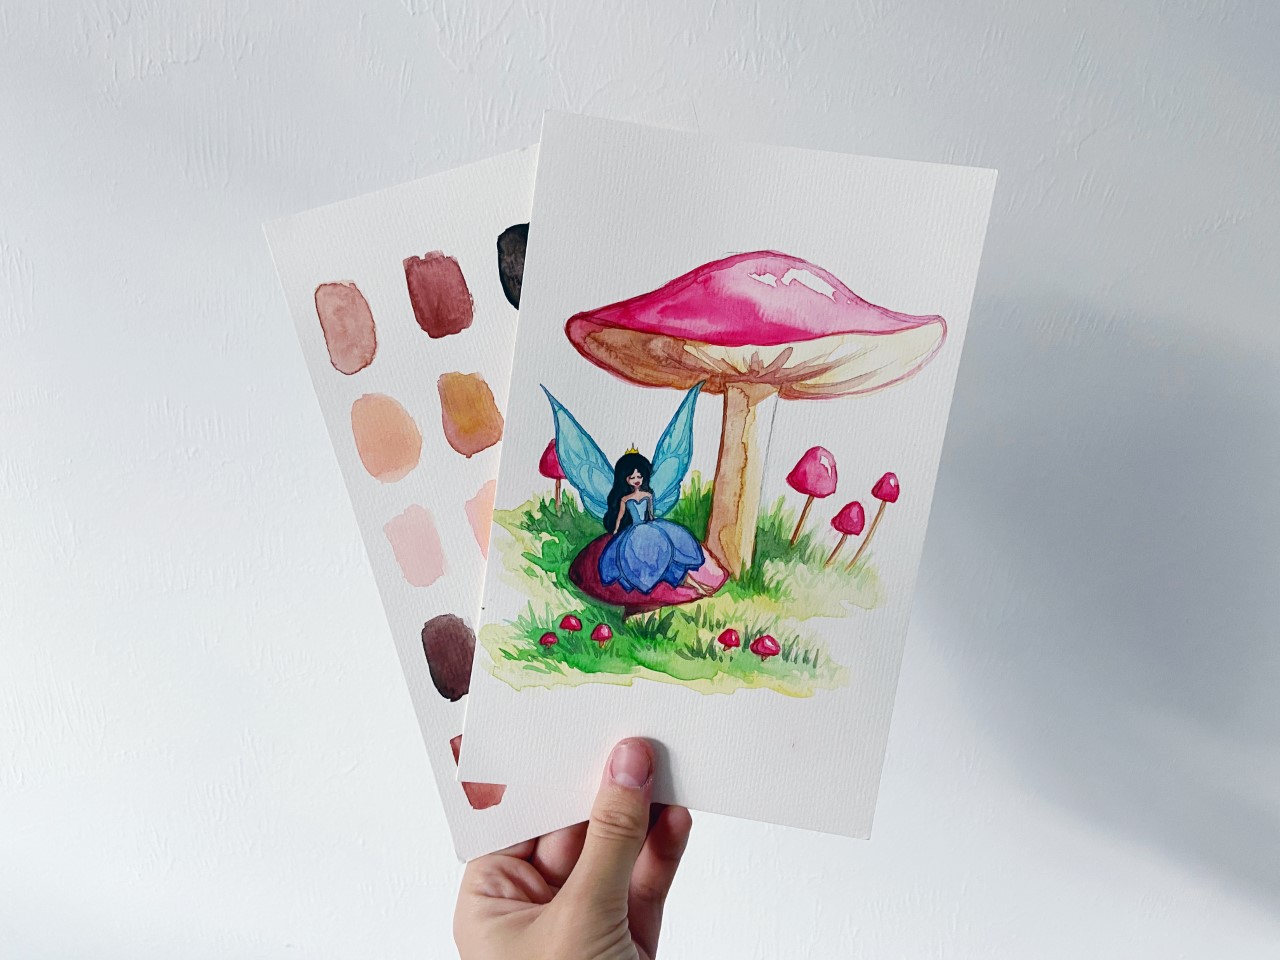 person holds up a watercolor painting of a fairy sitting on a mushroom